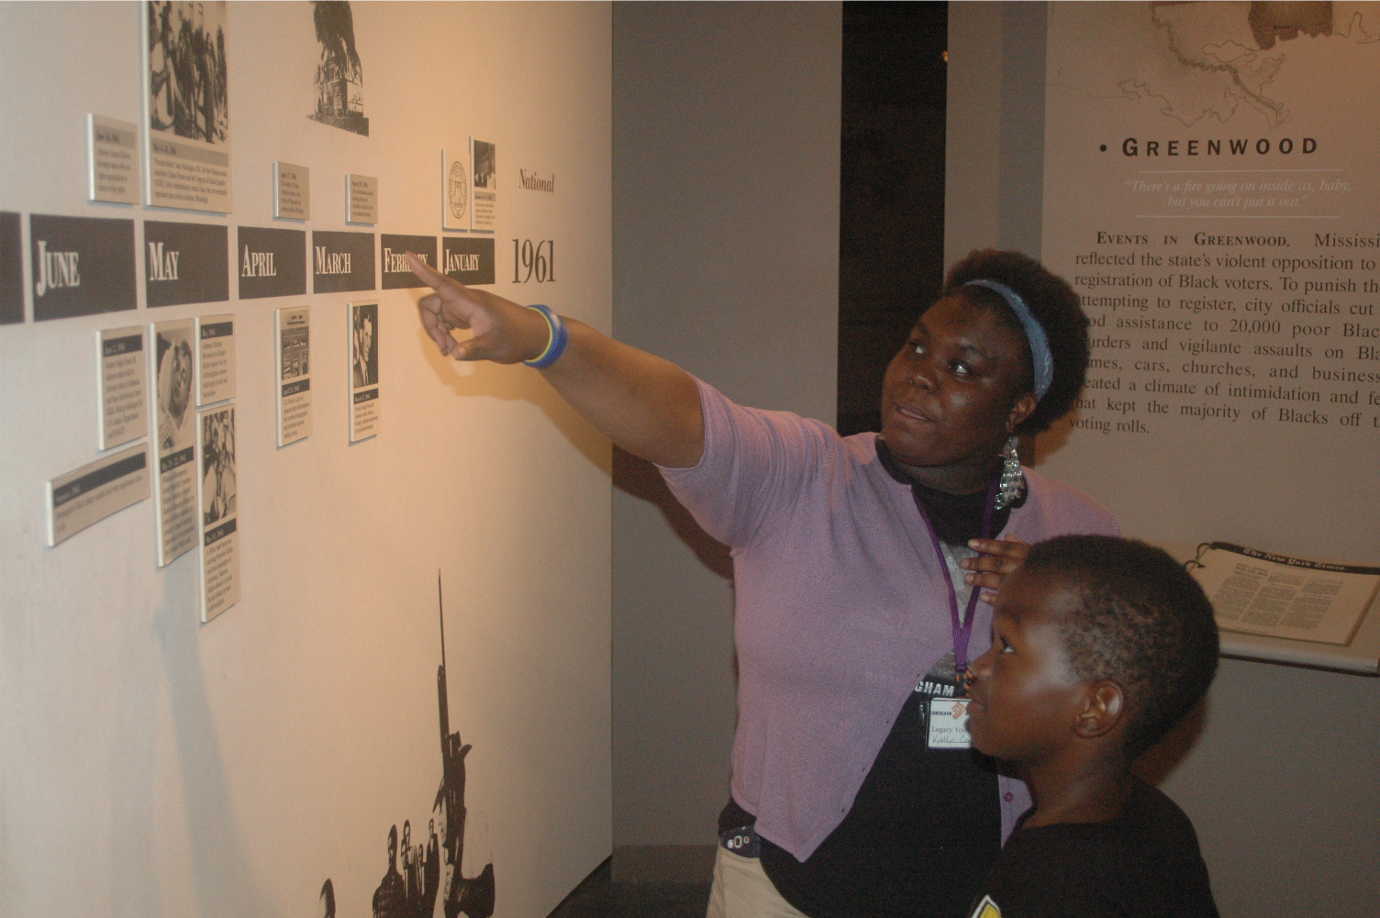 A Youth Leadership Program docent gives a tour. Image courtesy of the Birmingham Civil Rights Institute.